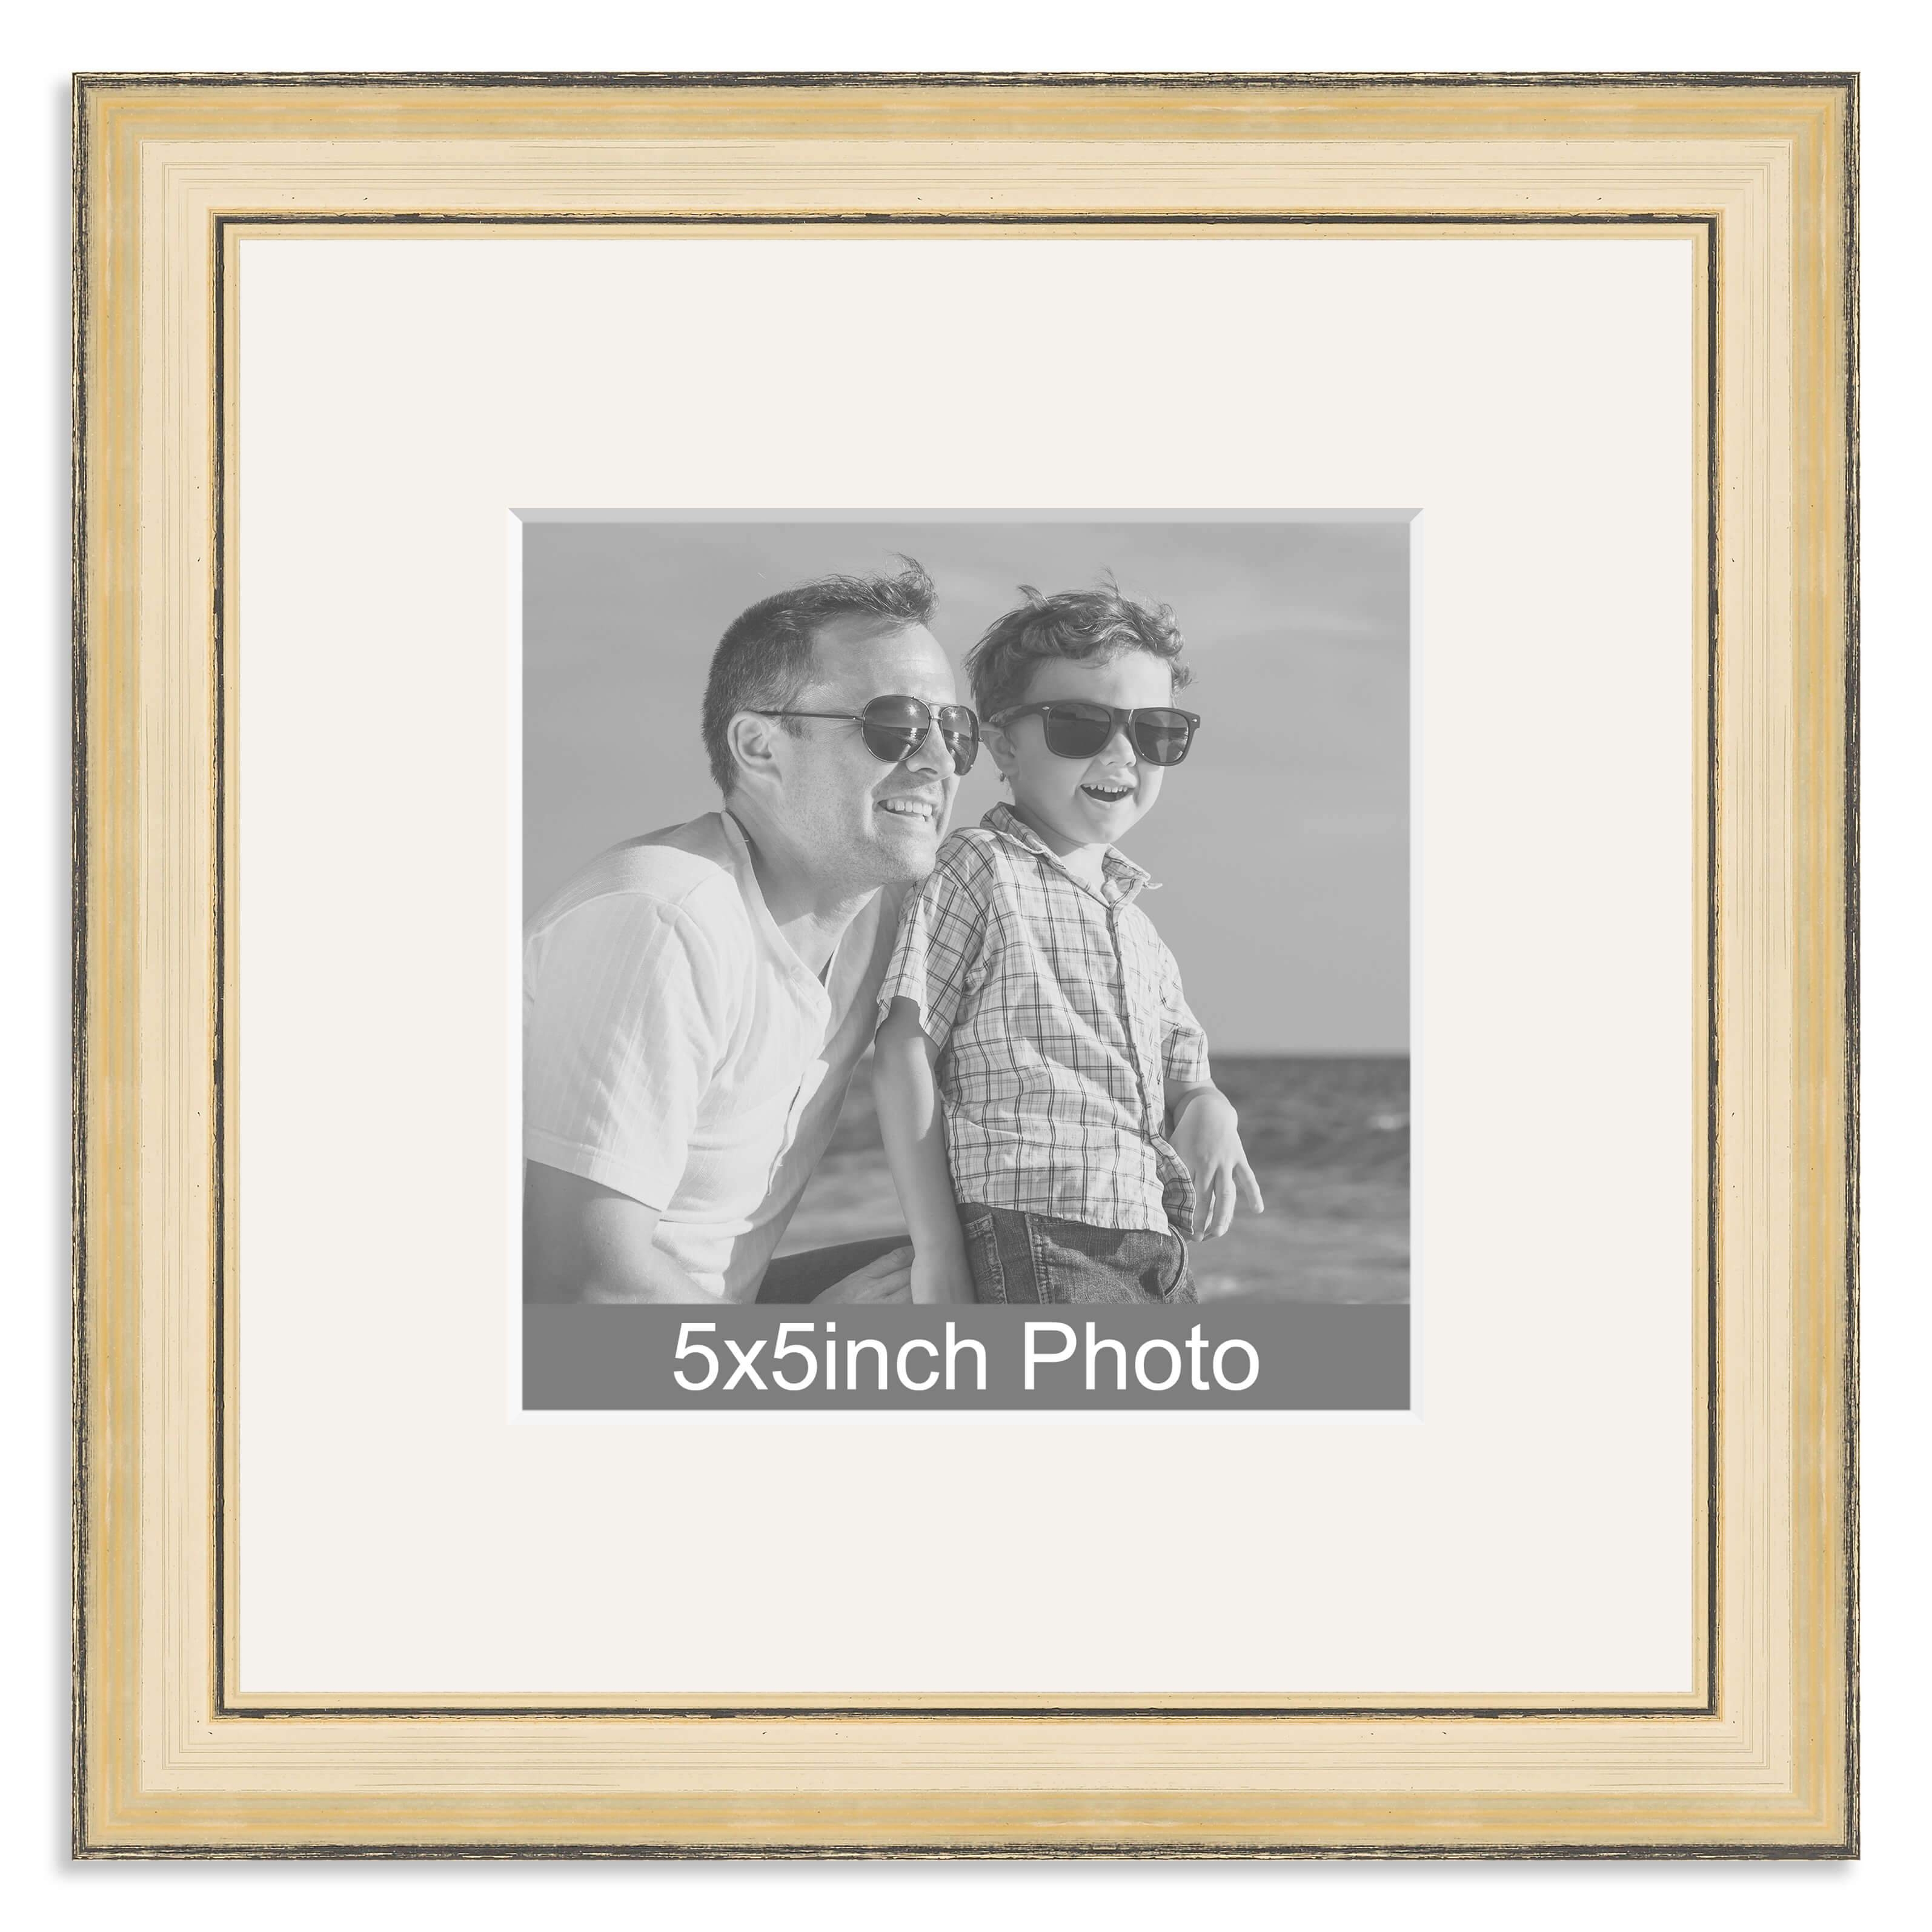 Gold Wooden Photo Frame with mount for a 5x5in Photo – Photo to follow by email